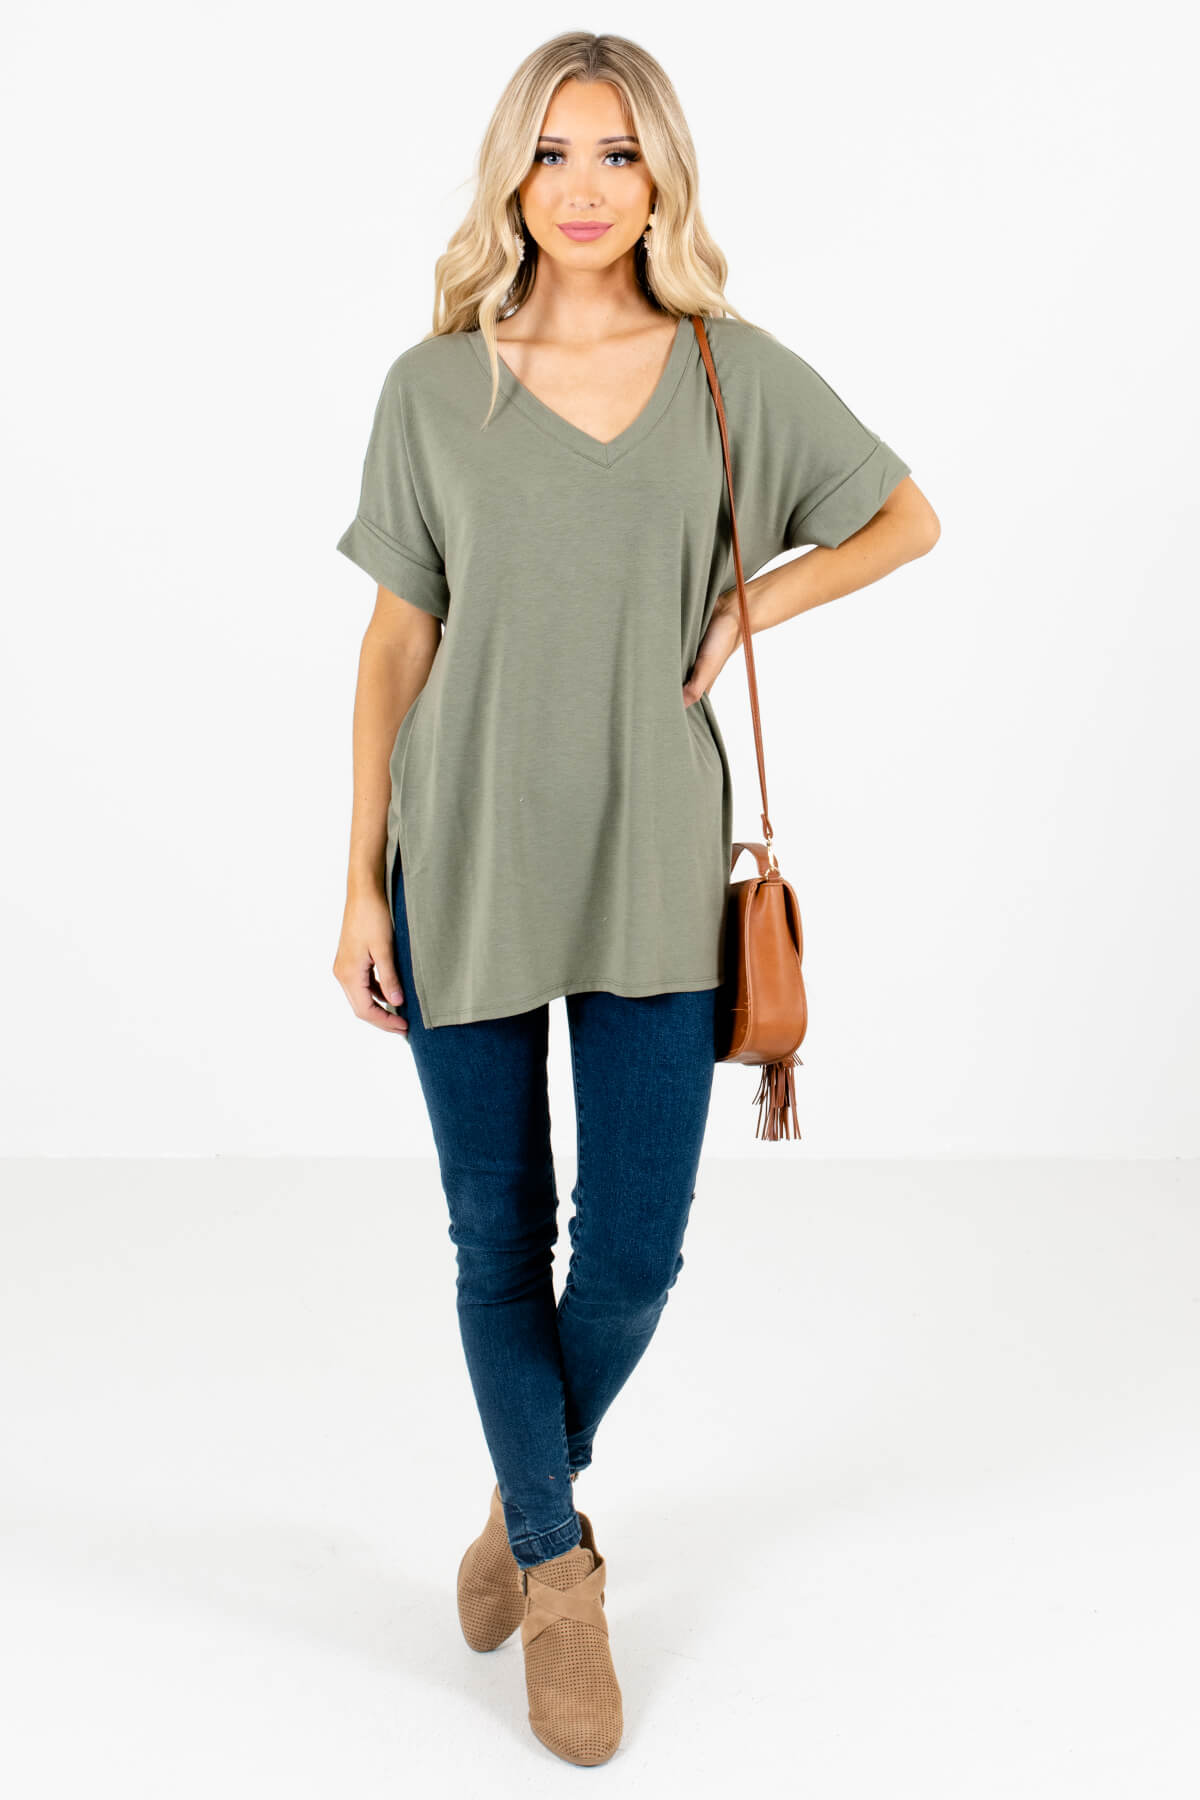 Women's Green Fall and Winter Boutique Clothing